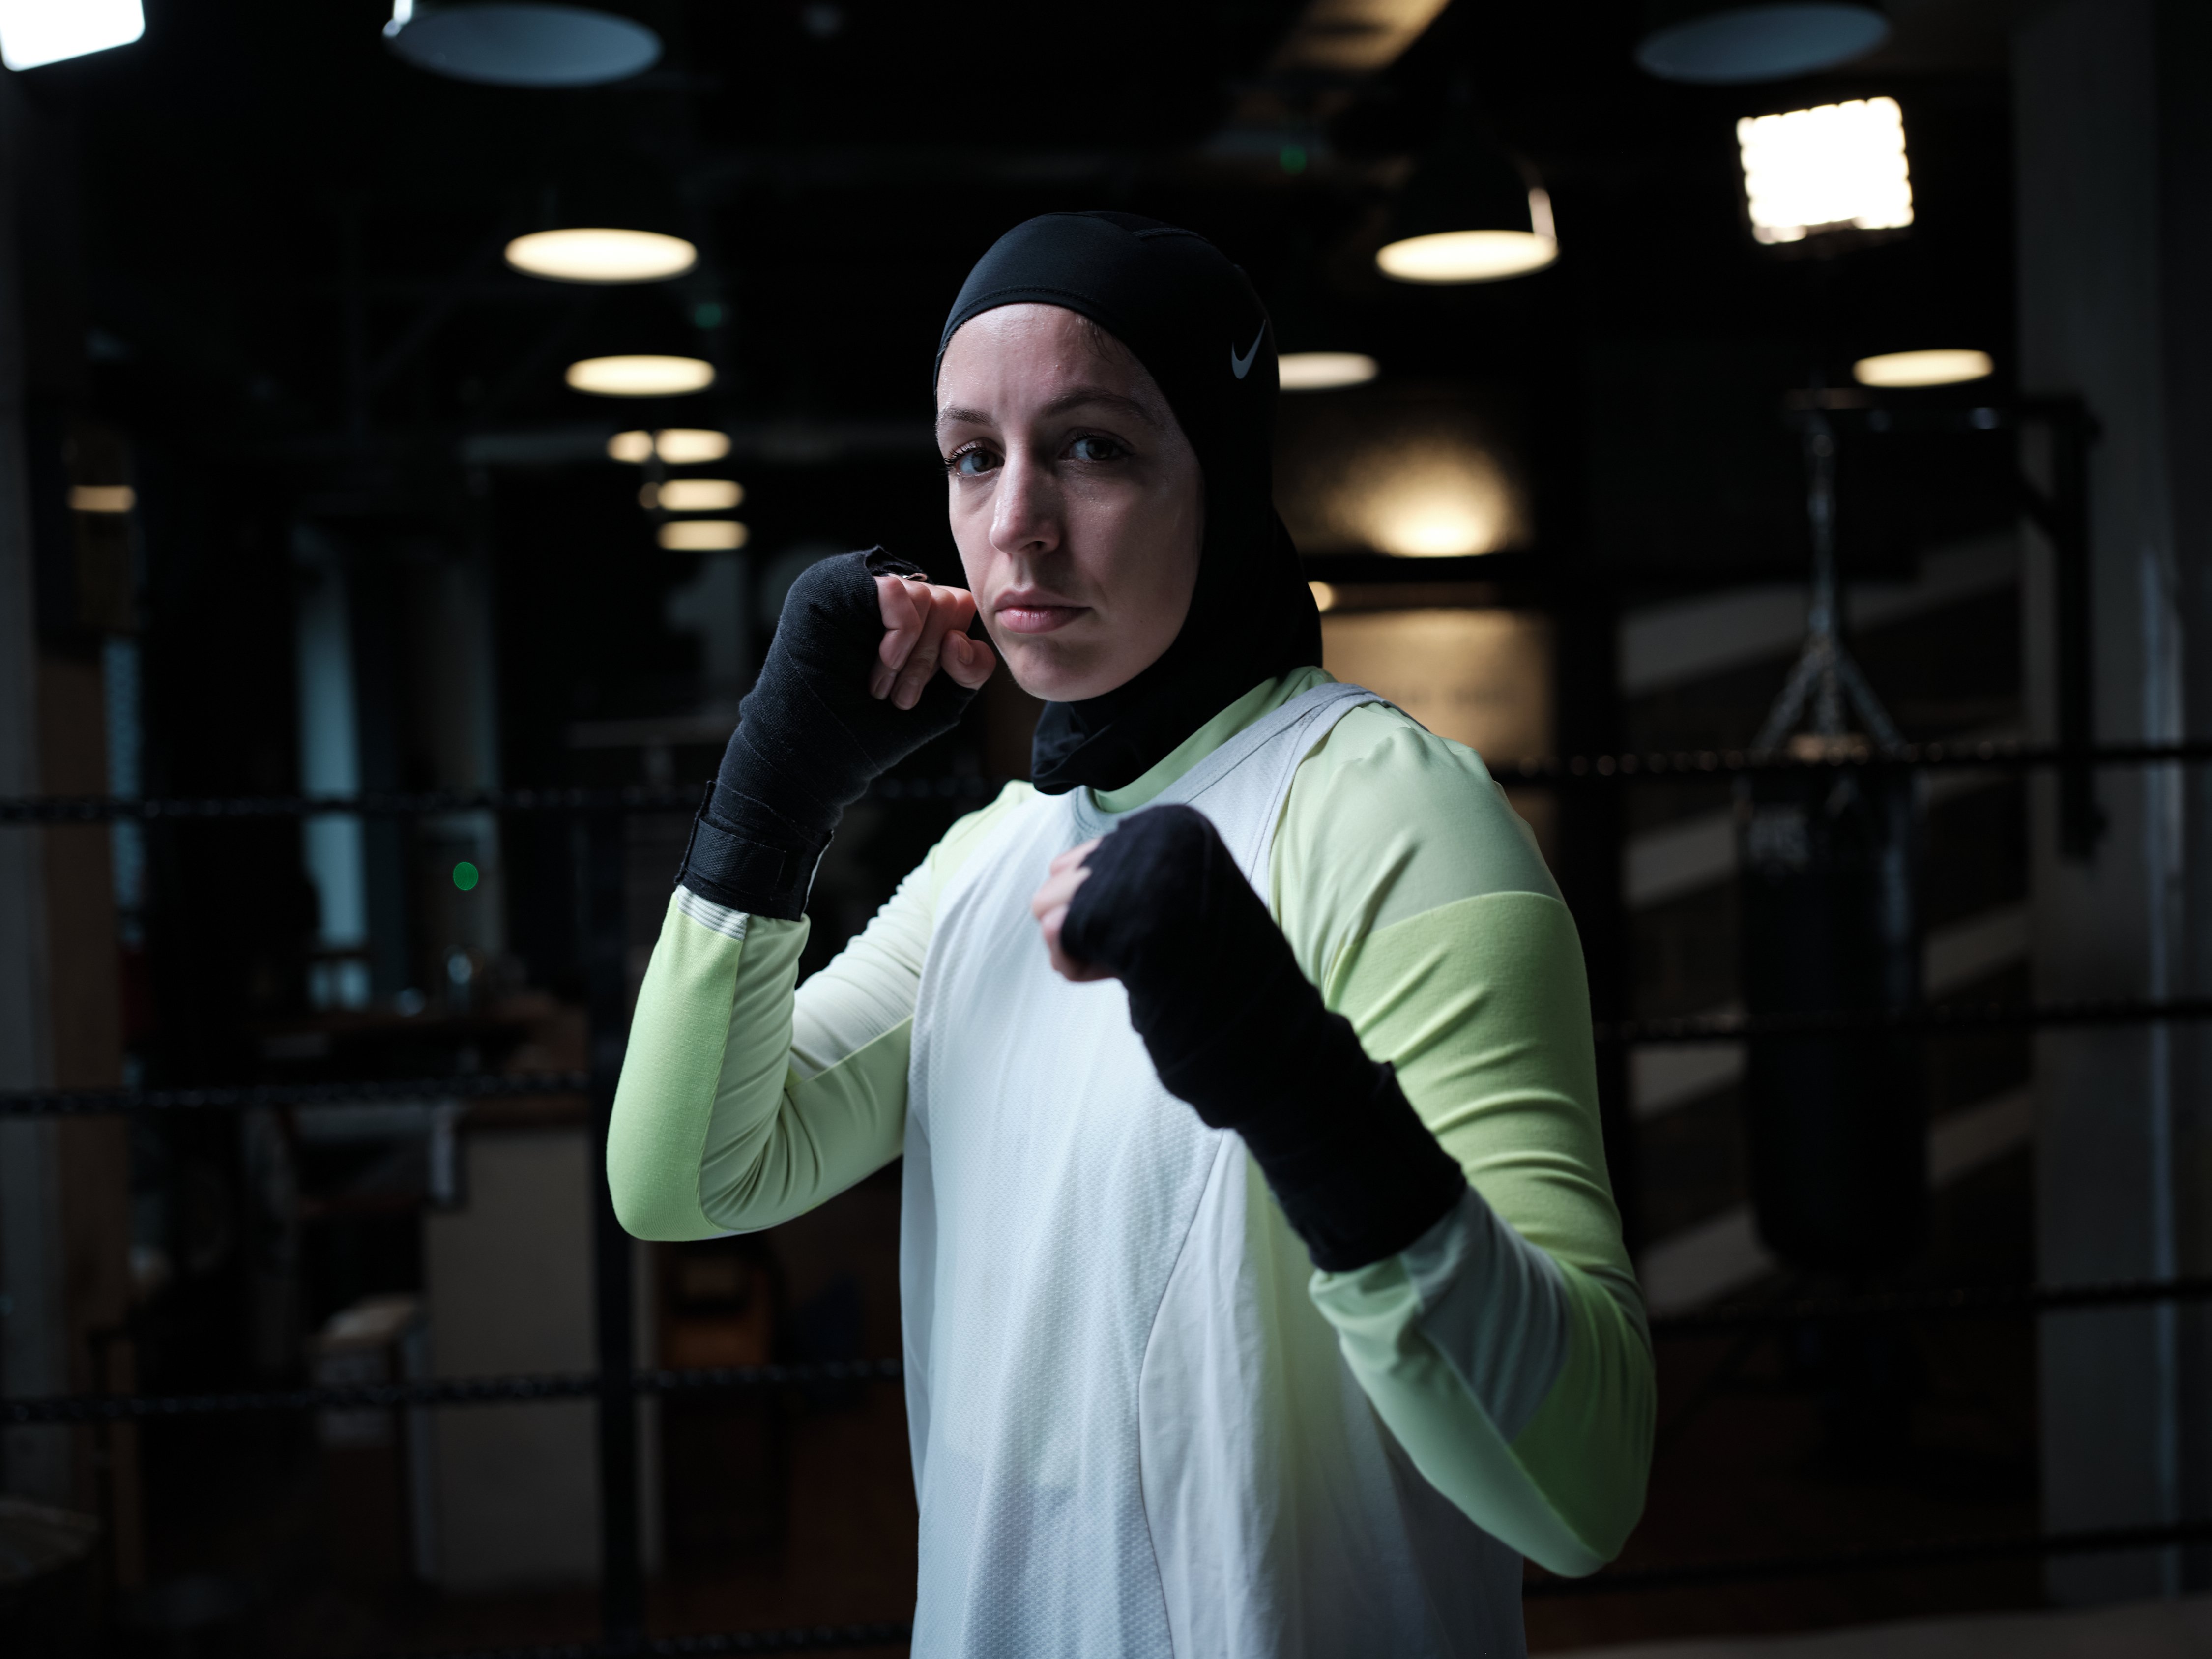 Nesrine Dally in a fighting position. She wears a black hijab, black handraps, white vest, and longsleeve green shirt. She is in a boxing gym.